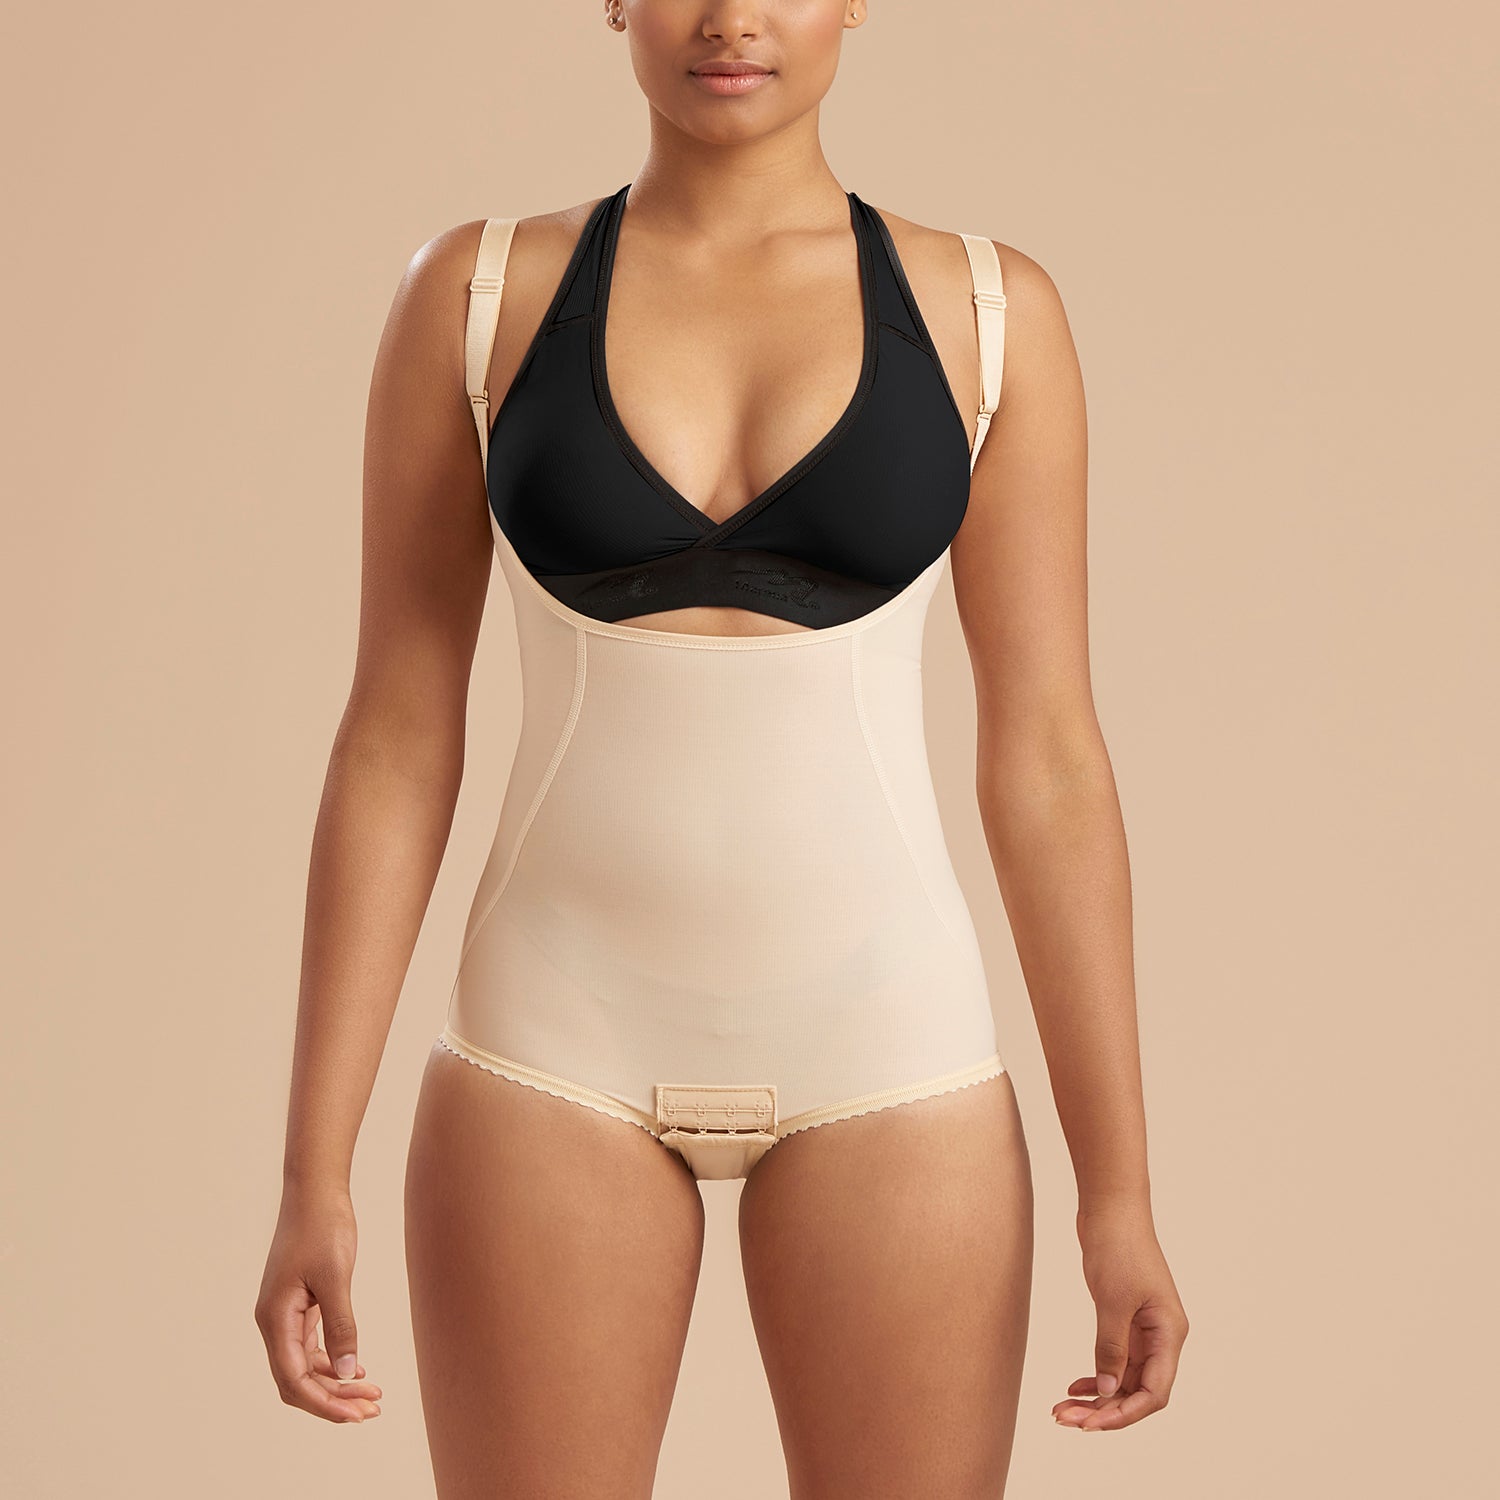 Post Surgery Compression Garments  Body Girdle After Surgery - The Marena  Group, LLC